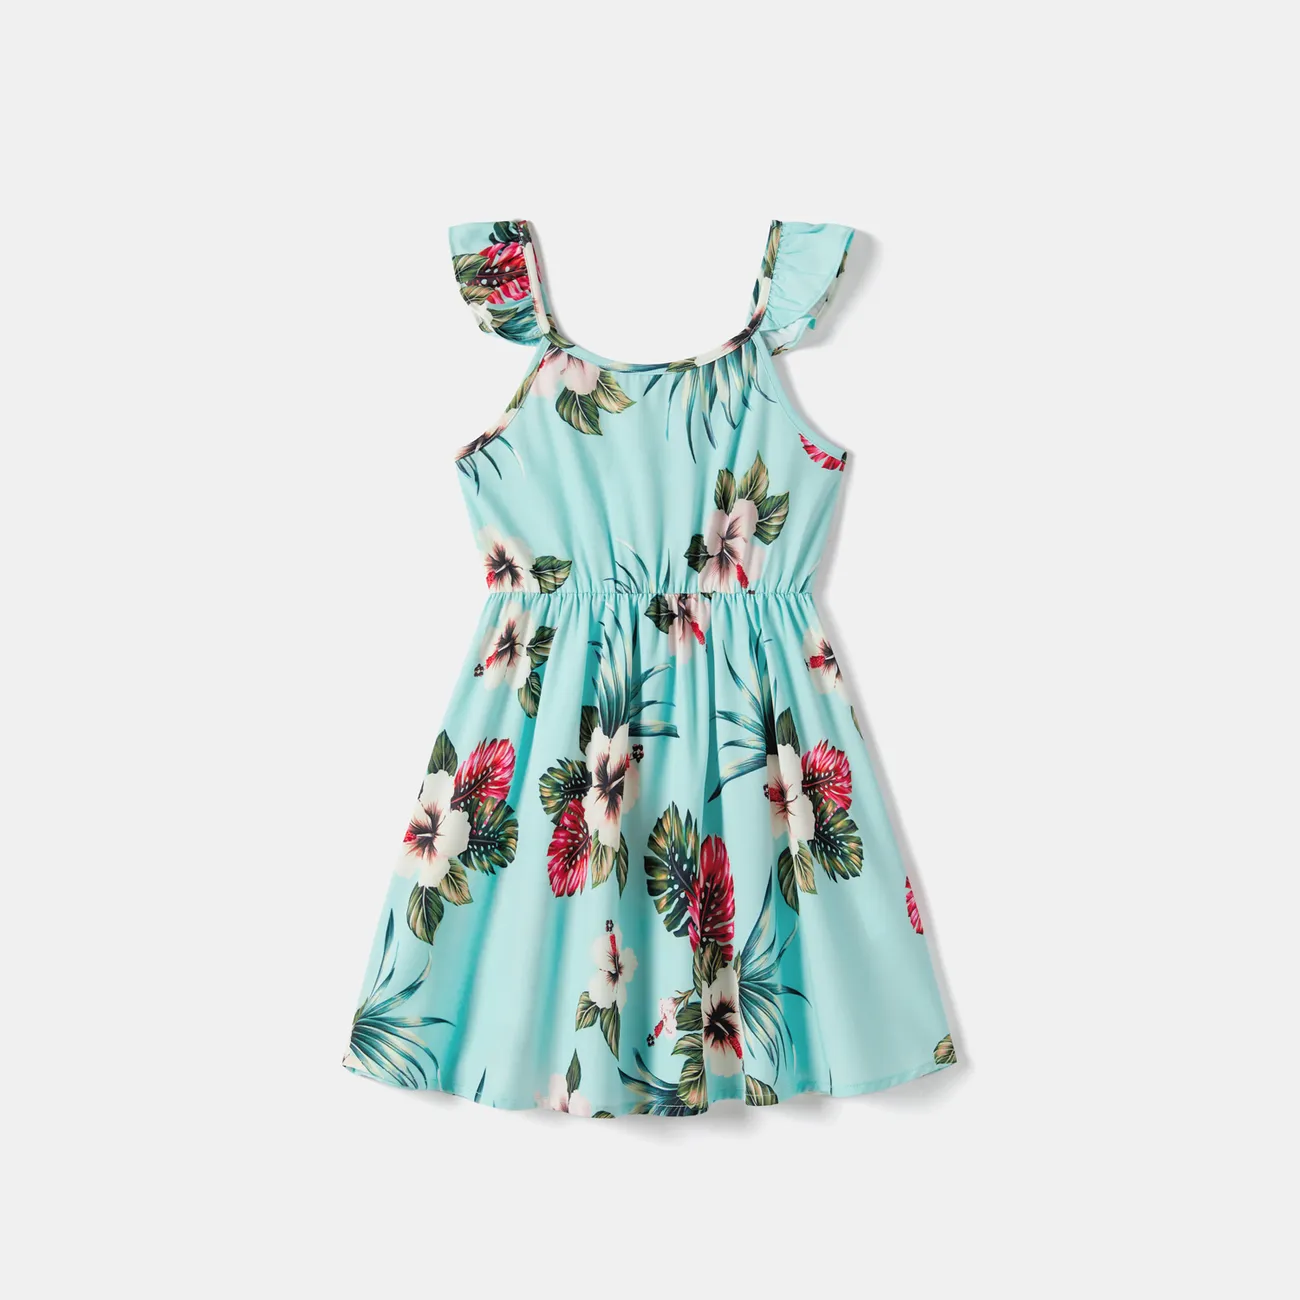 Family Matching Allover Floral Print Cami Dresses and Short-sleeve Shirts/Tops Sets Light Green big image 1